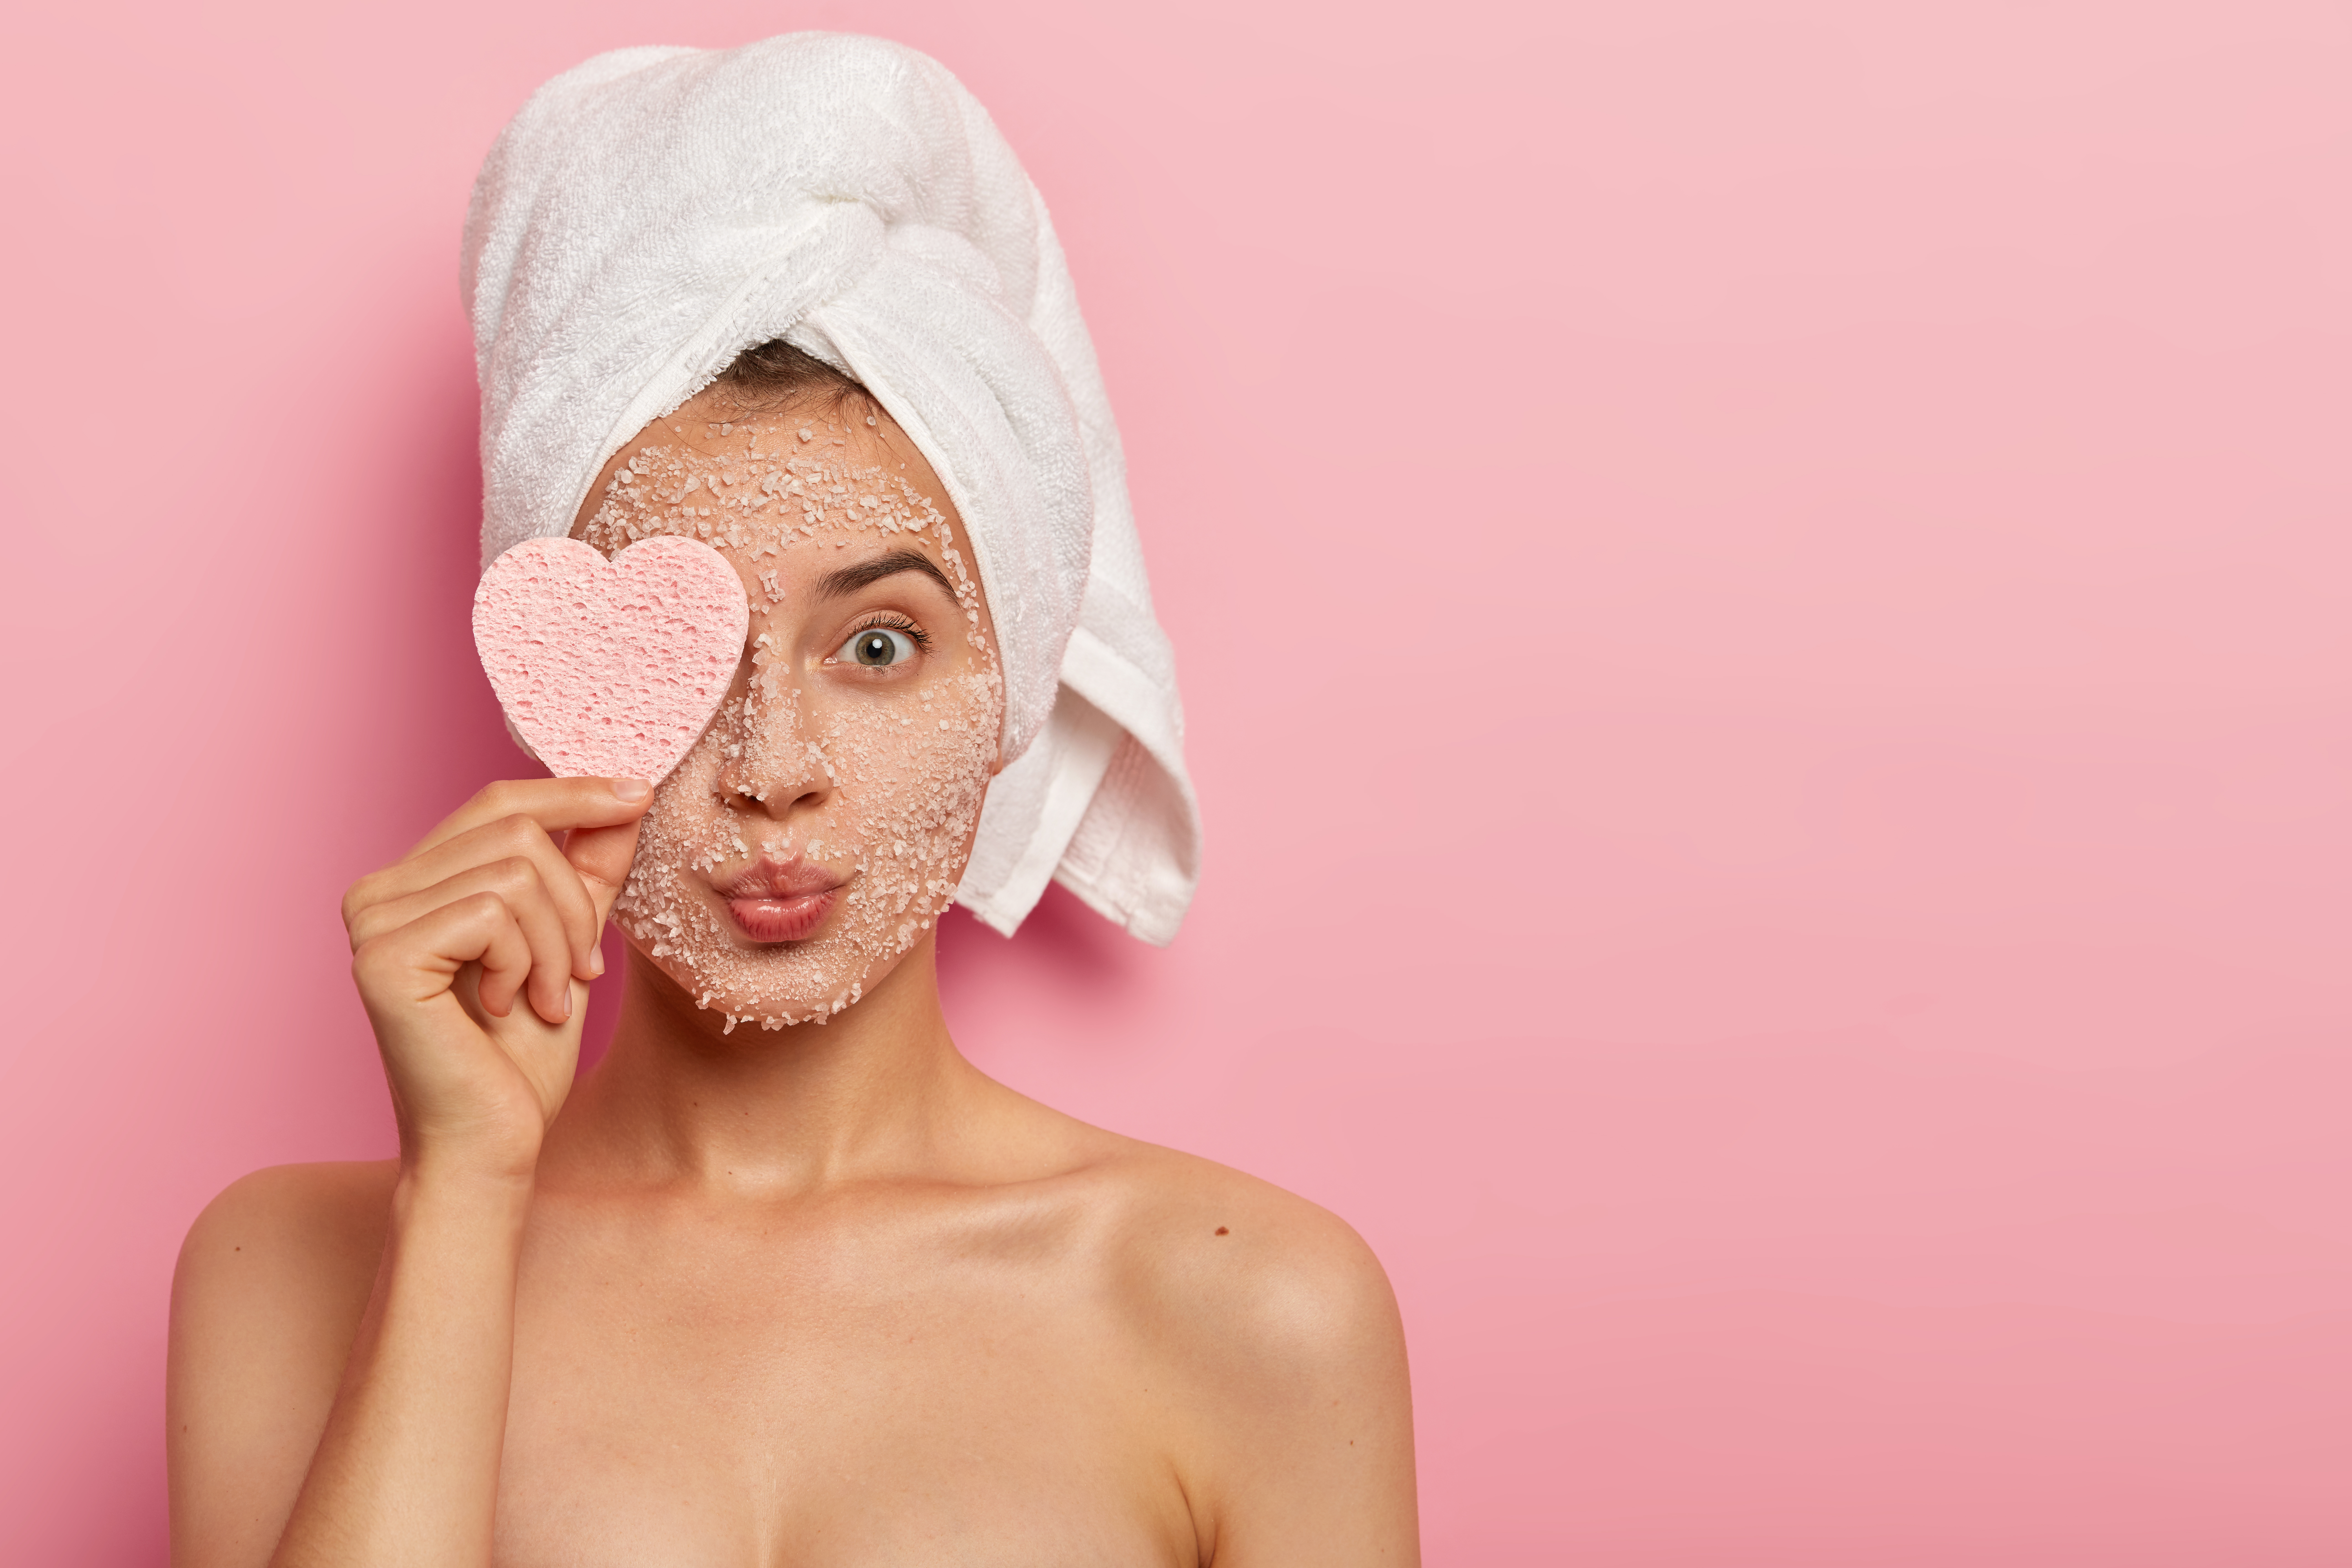 Exfoliation is essential to achieve a skin free of impurities.